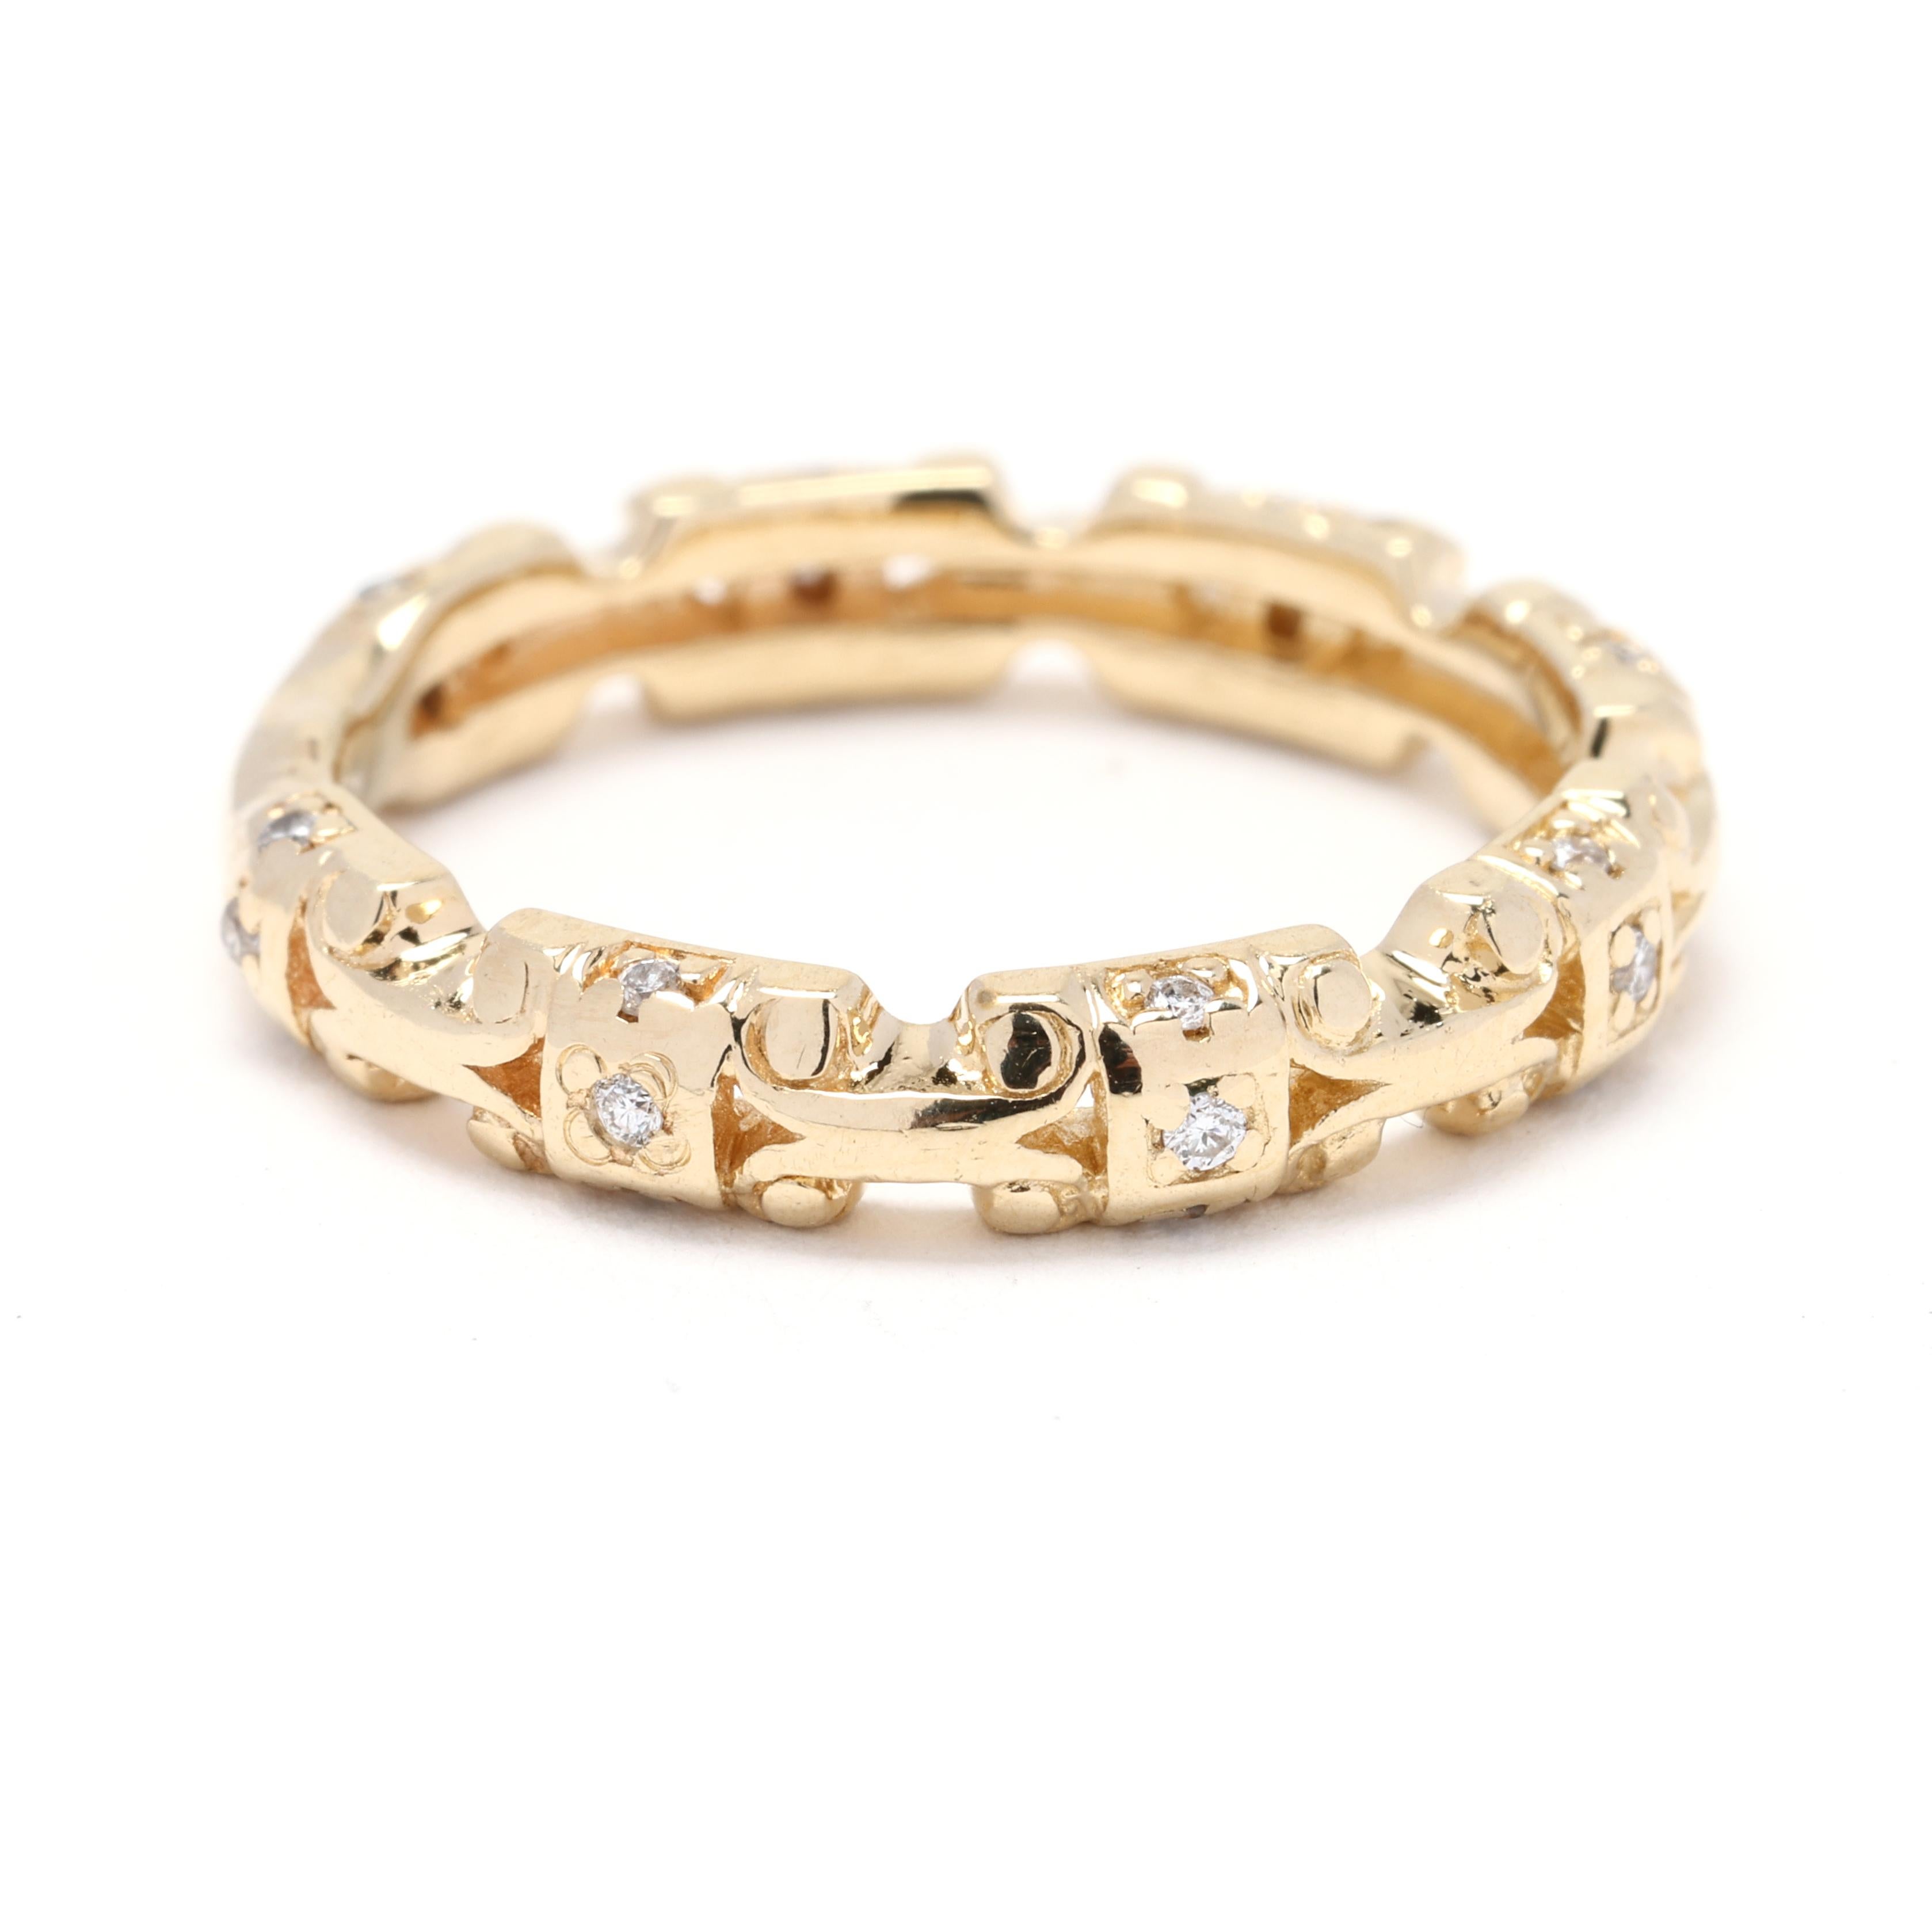 This stunning diamond patterned band is crafted in 14k yellow gold and features a unique design that is sure to catch the eye. The band is adorned with a pattern of tiny diamonds that adds a touch of sparkle and elegance to the piece. The diamonds